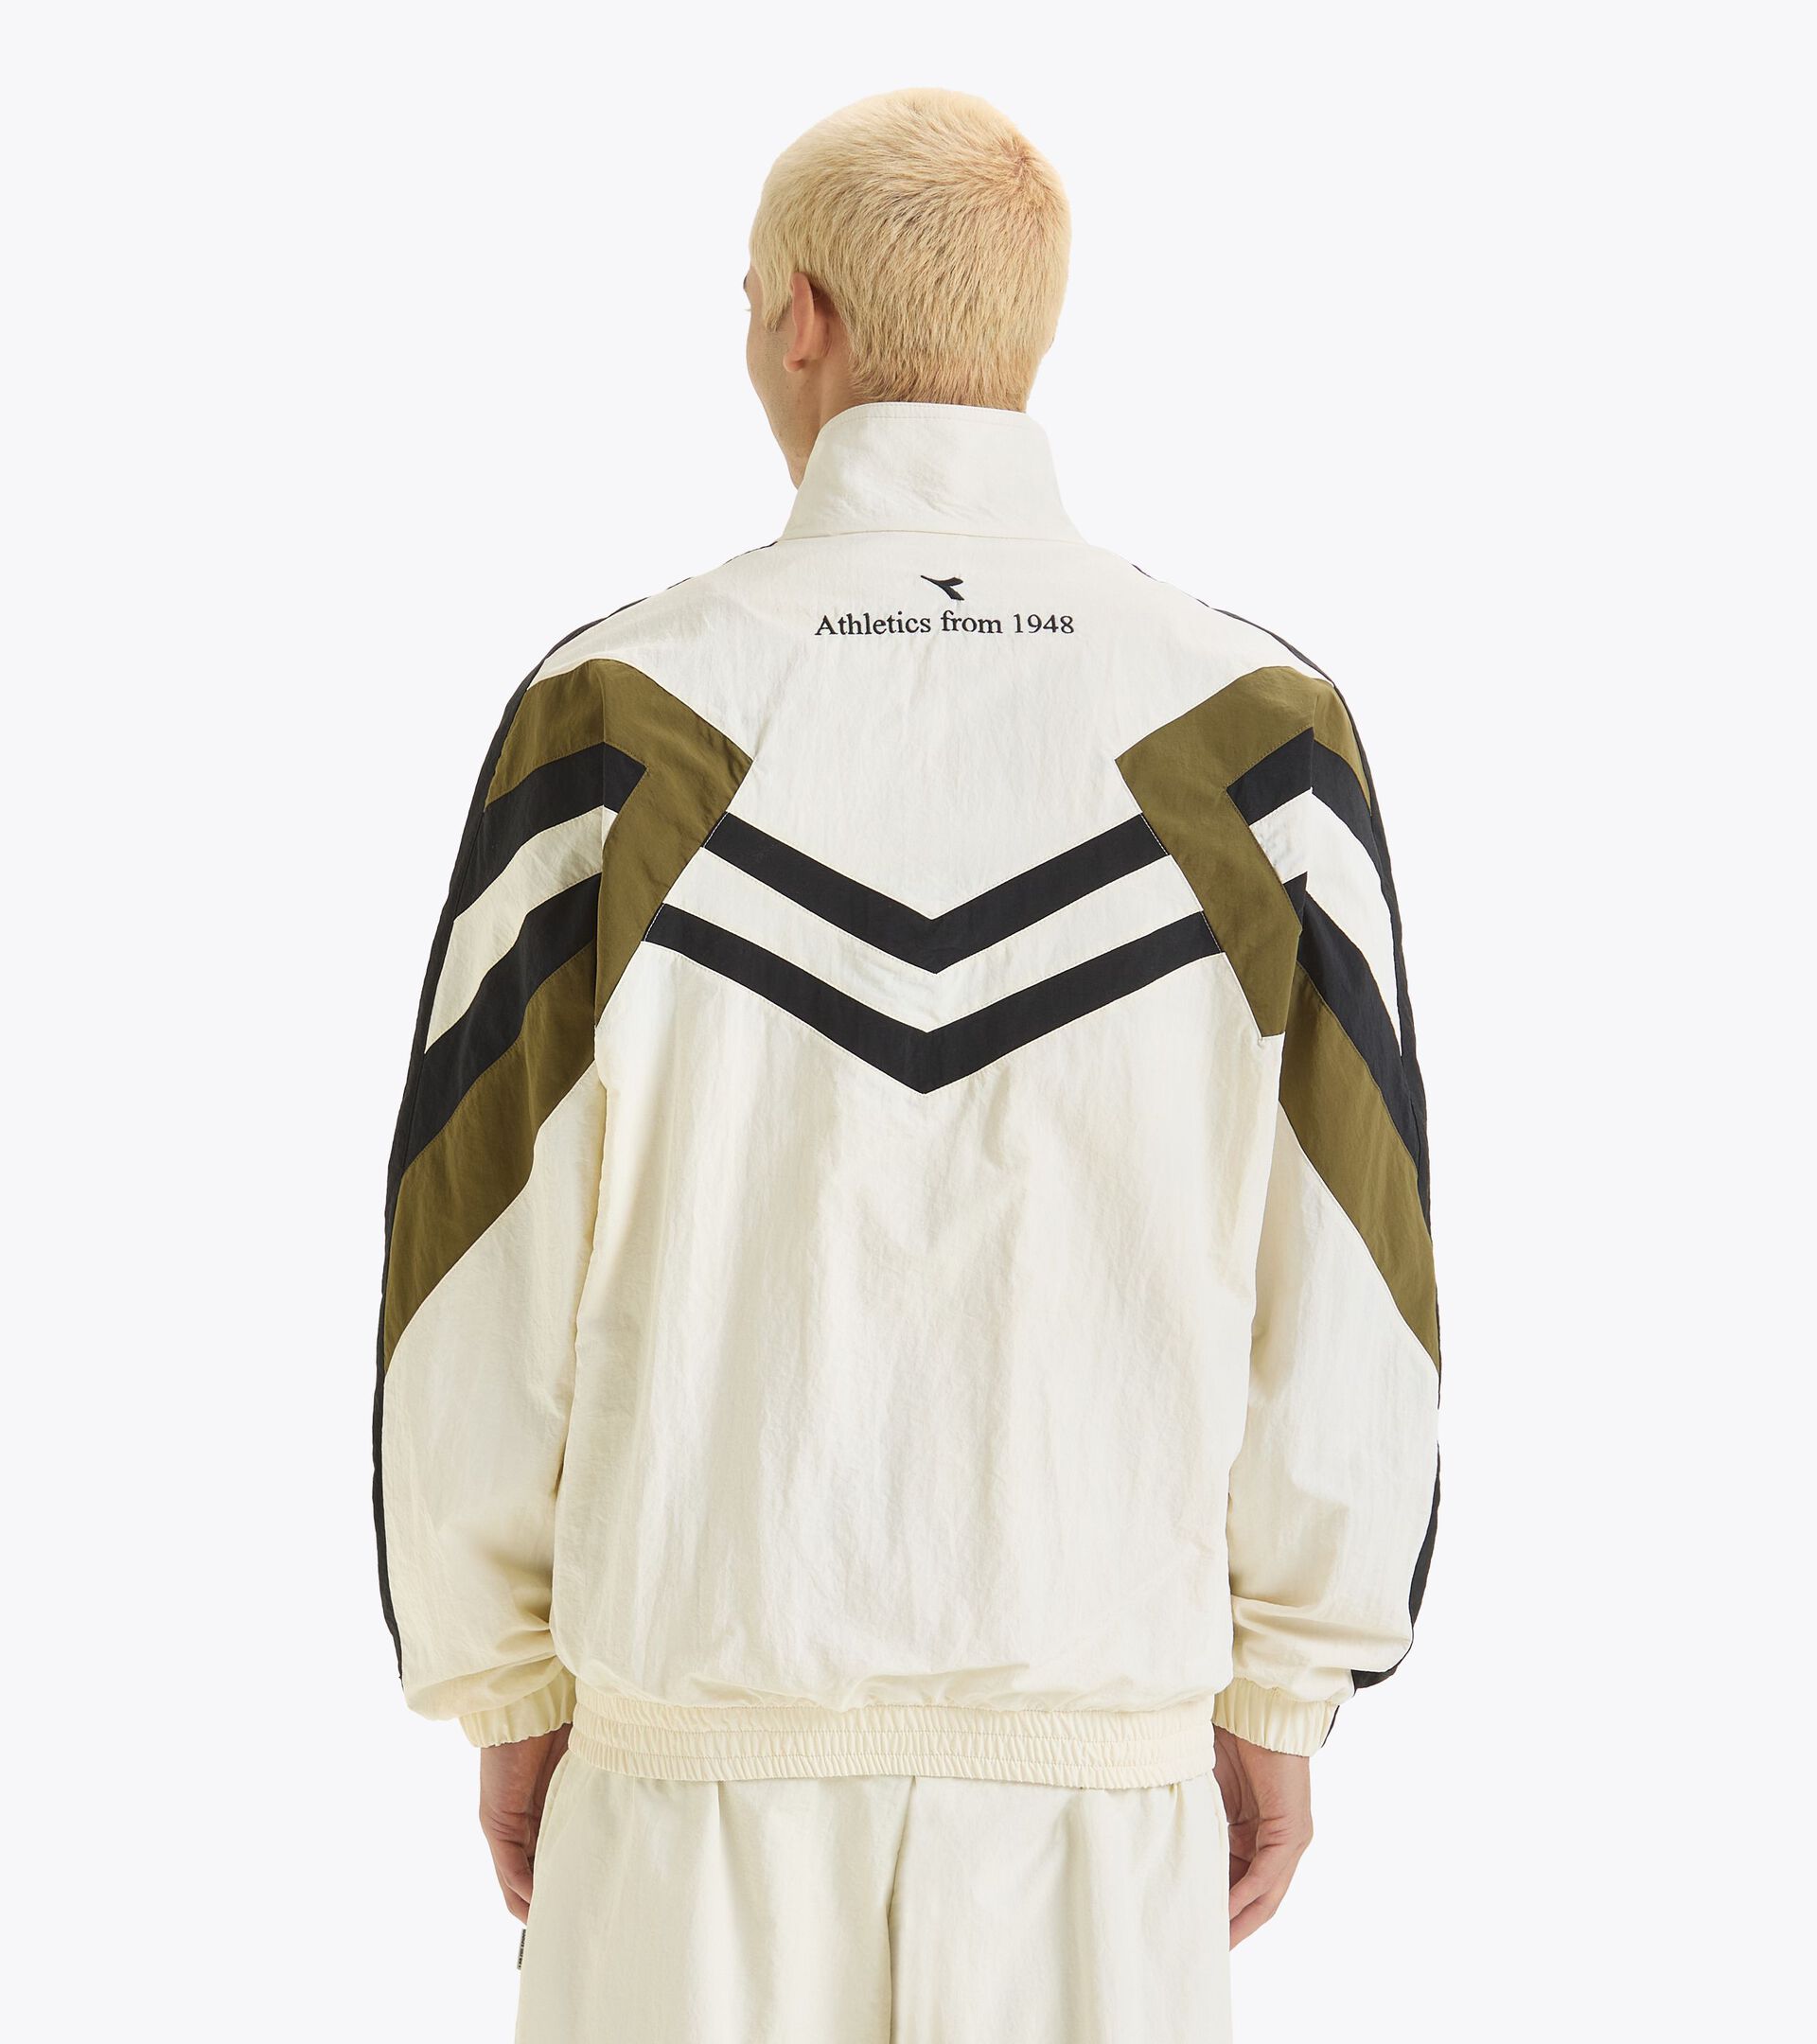 Track Jacket - made in Italy - genderneutral TRACK JACKET LEGACY WISPERN WEISS - Diadora